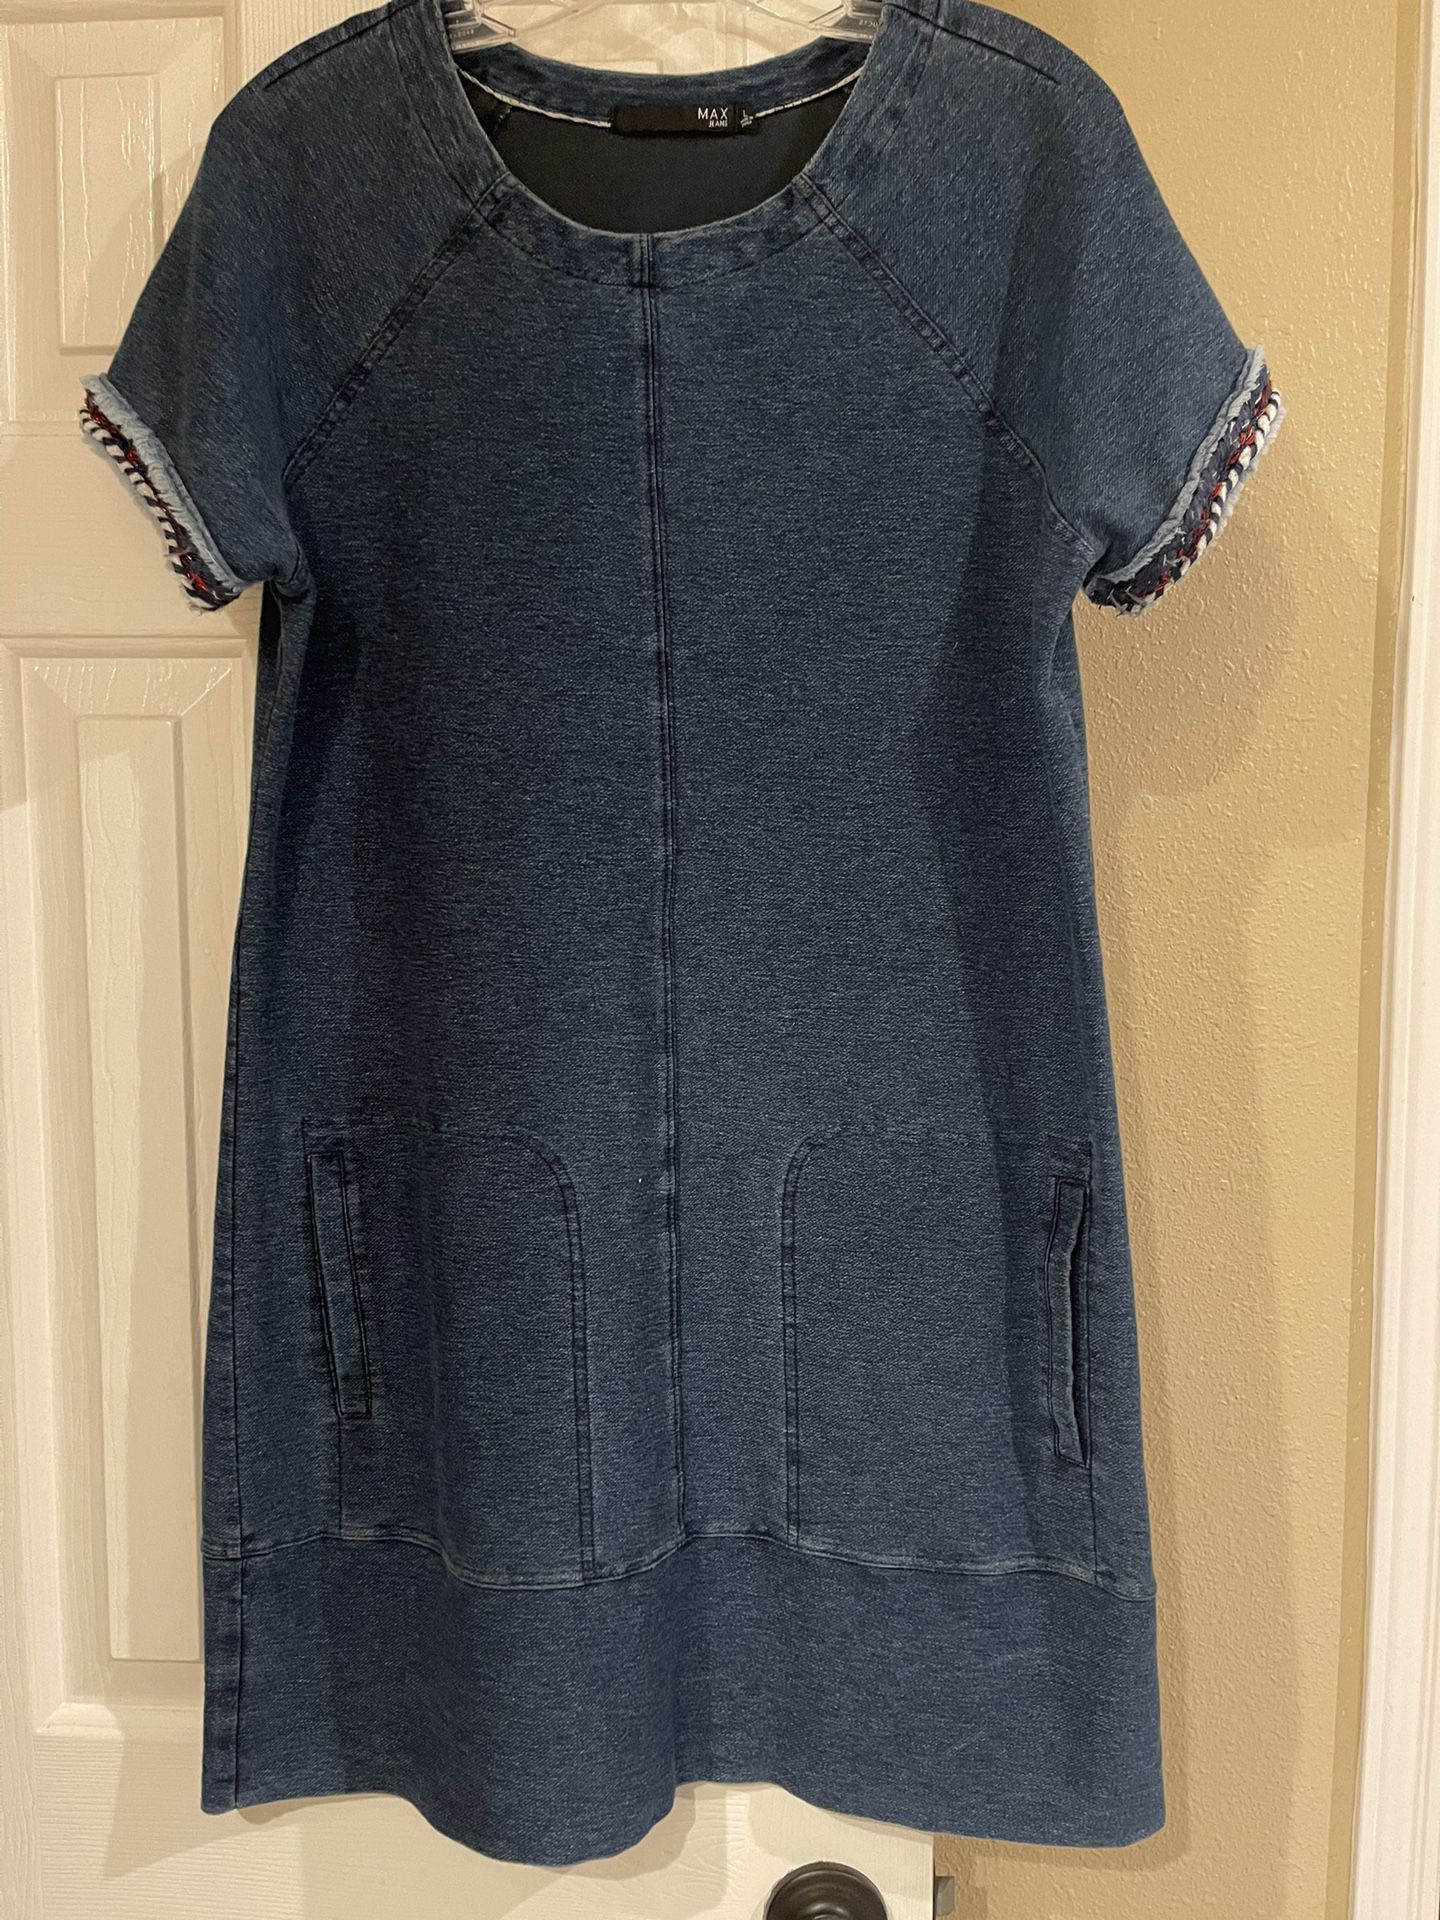 2 Dresses, Grey With White GAP Size Medium, Blue MAX Jeans Size Large With Pockets 